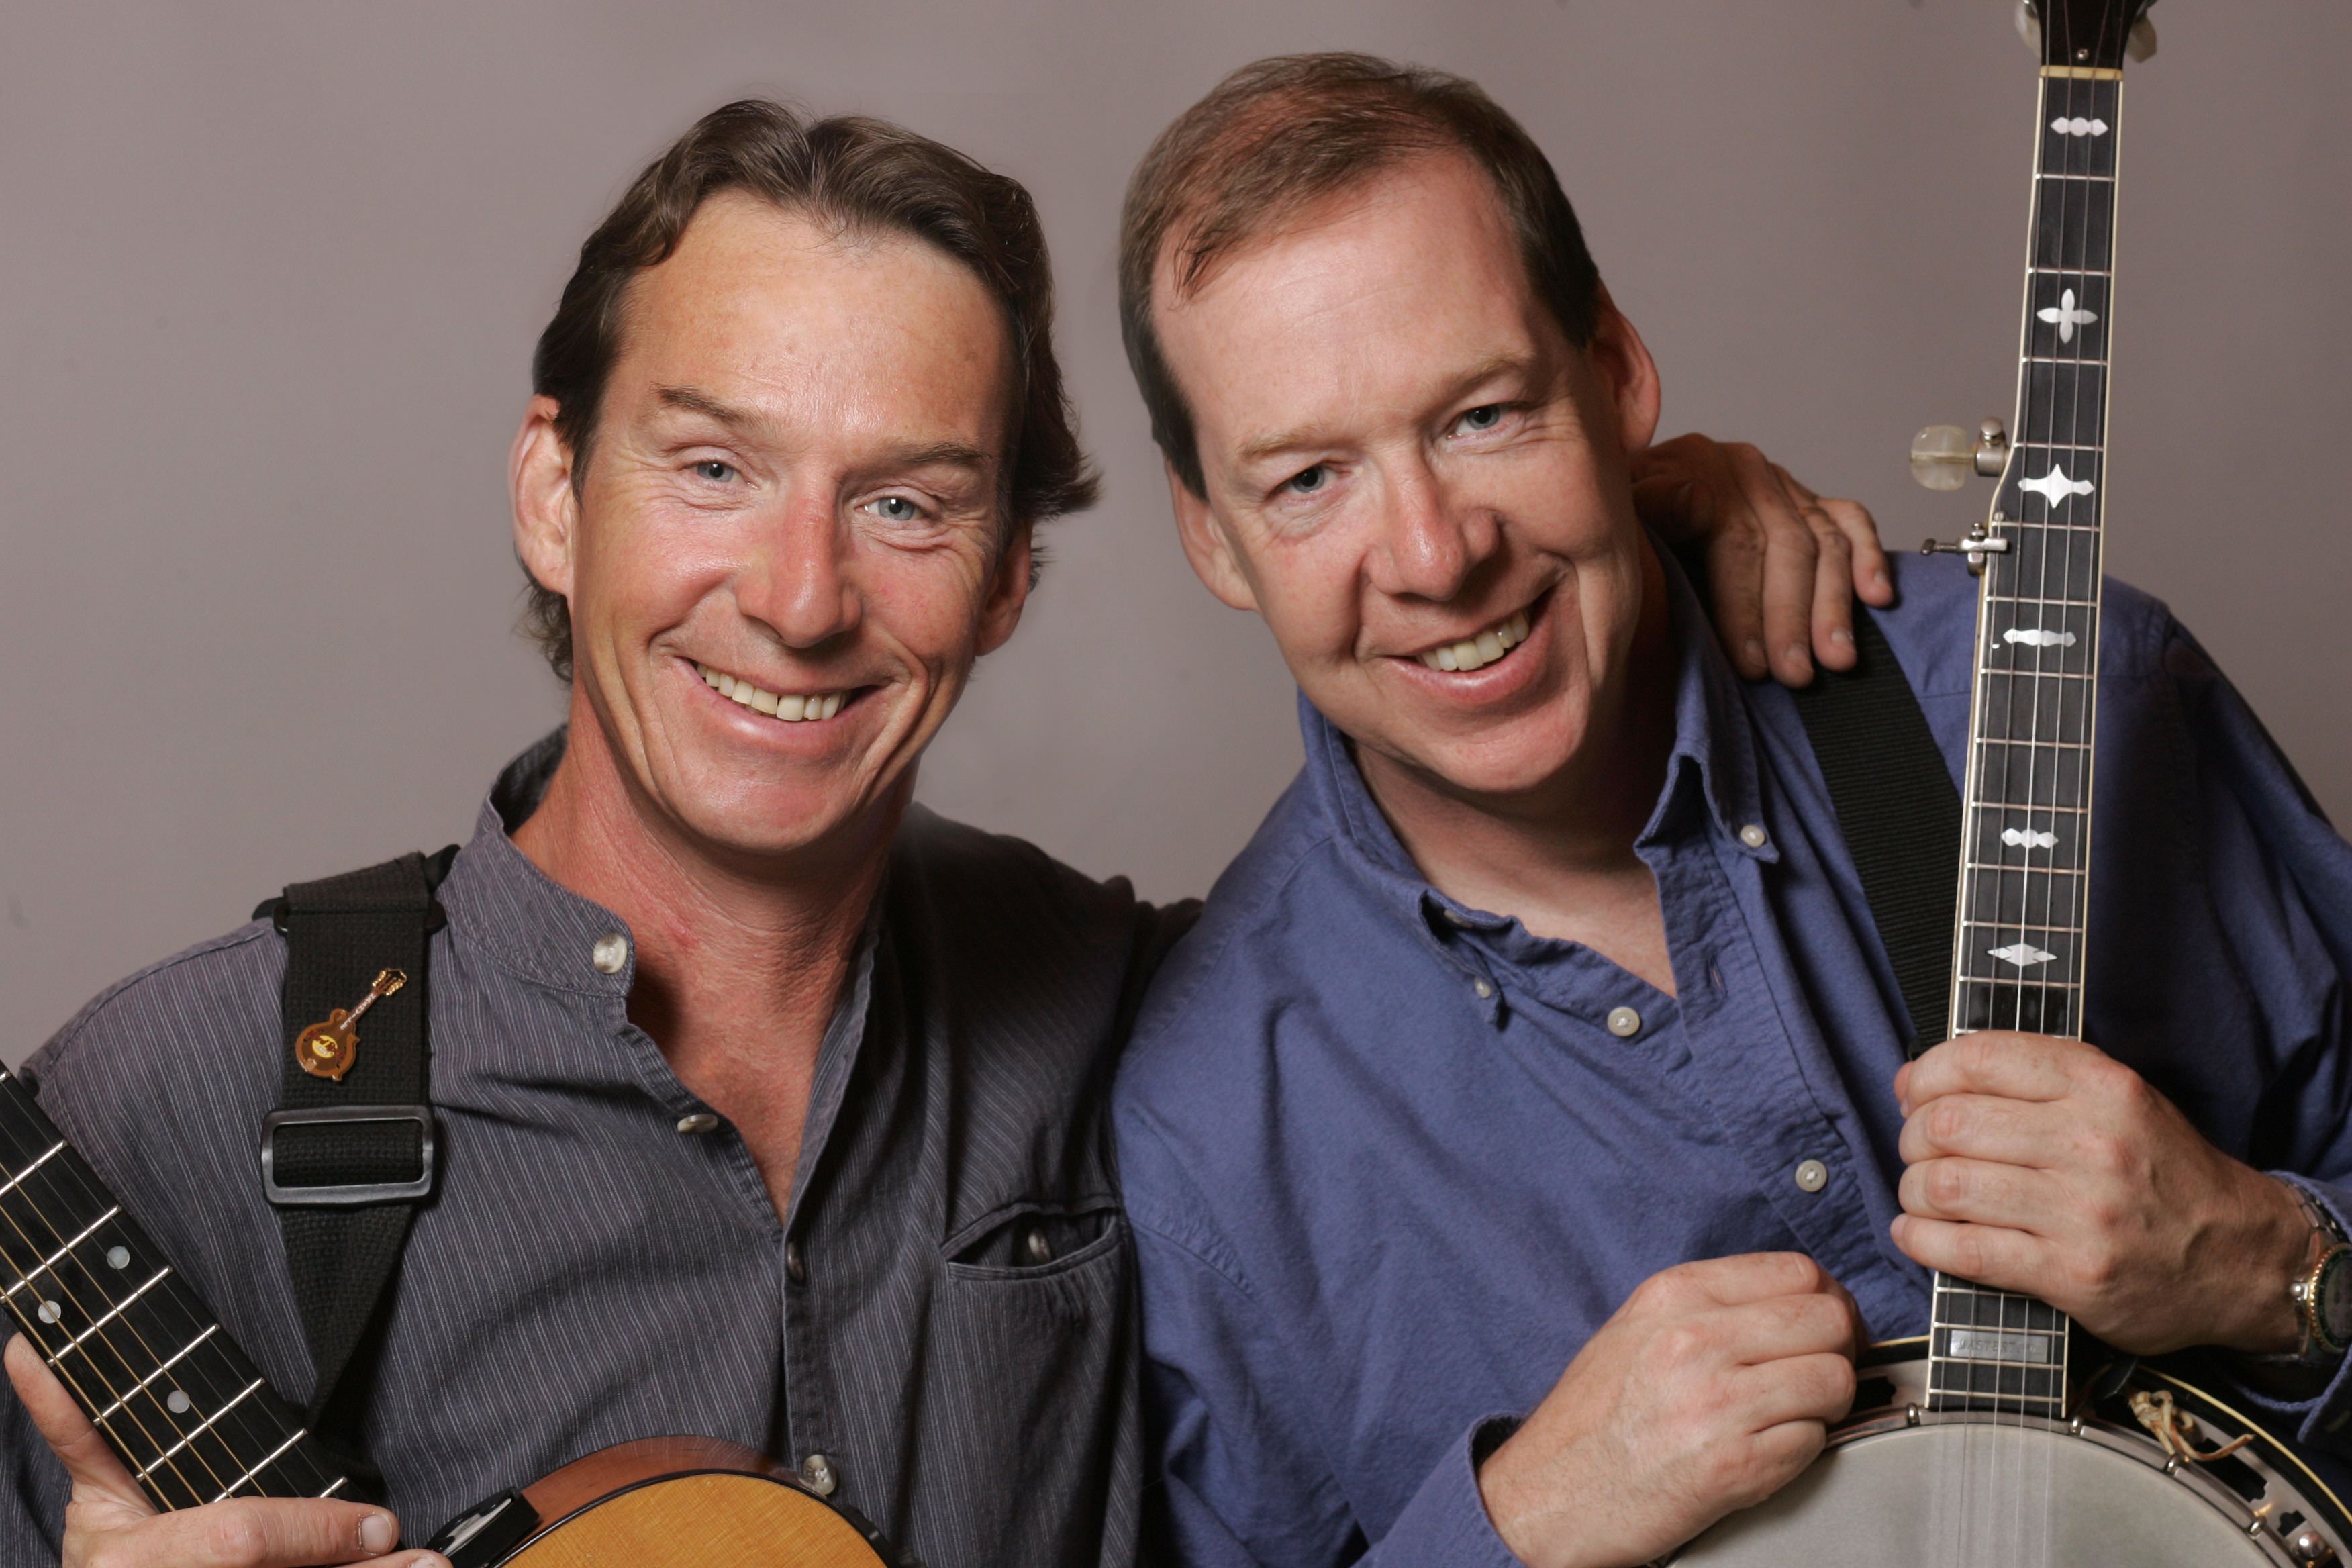 Dady Brothers, Irish Folk Duo, to Perform at Andover Lions Clu